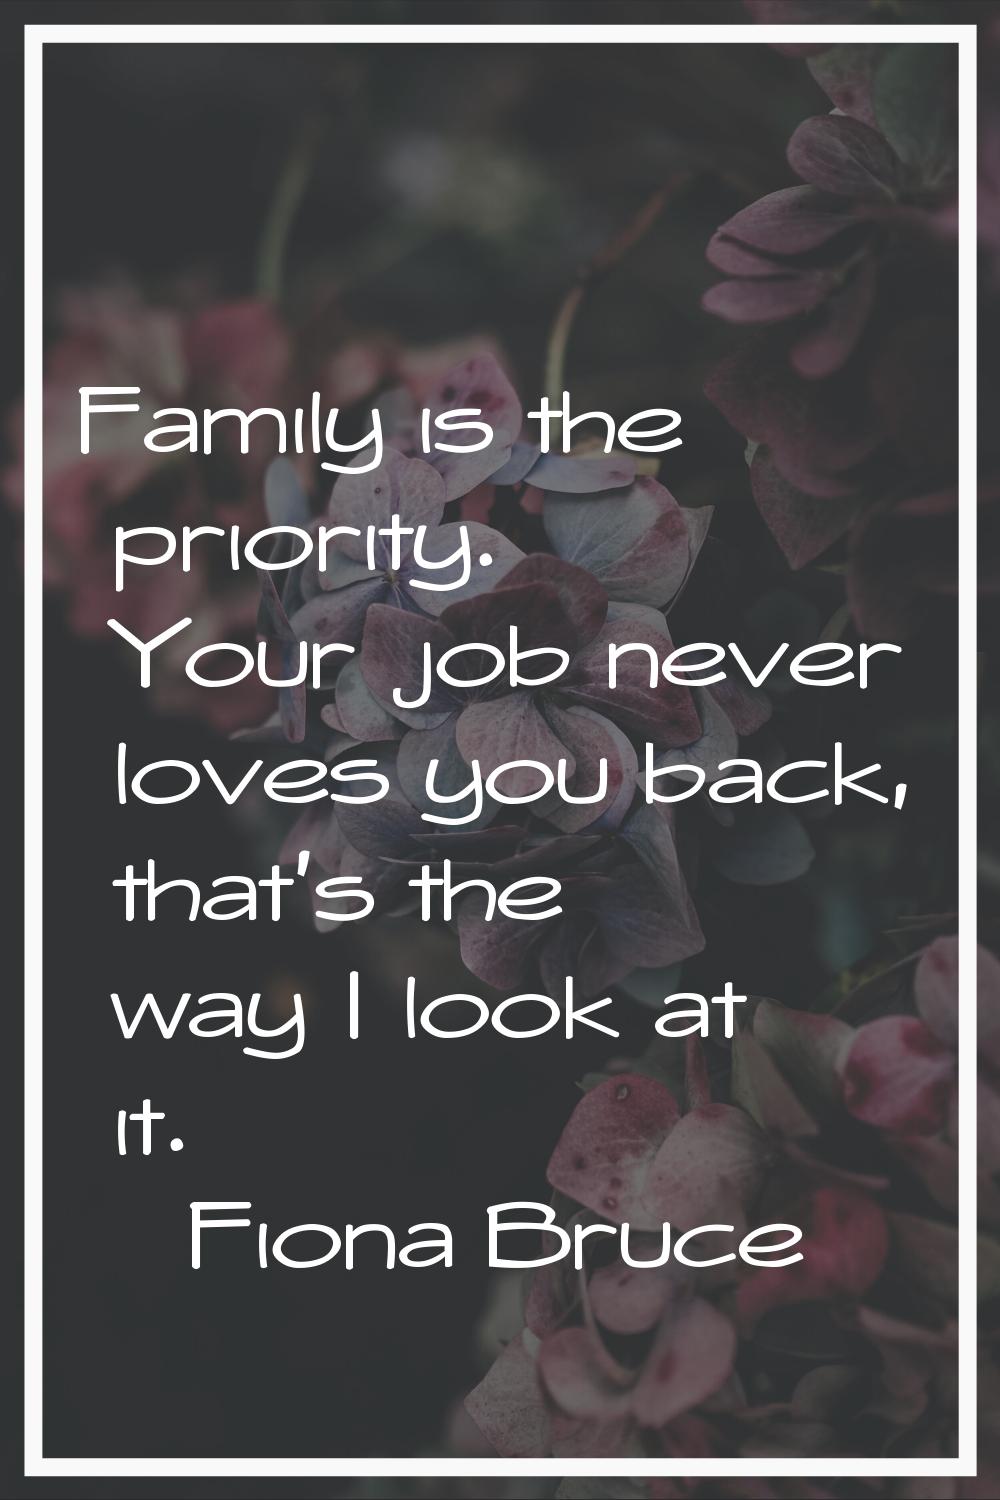 Family is the priority. Your job never loves you back, that's the way I look at it.